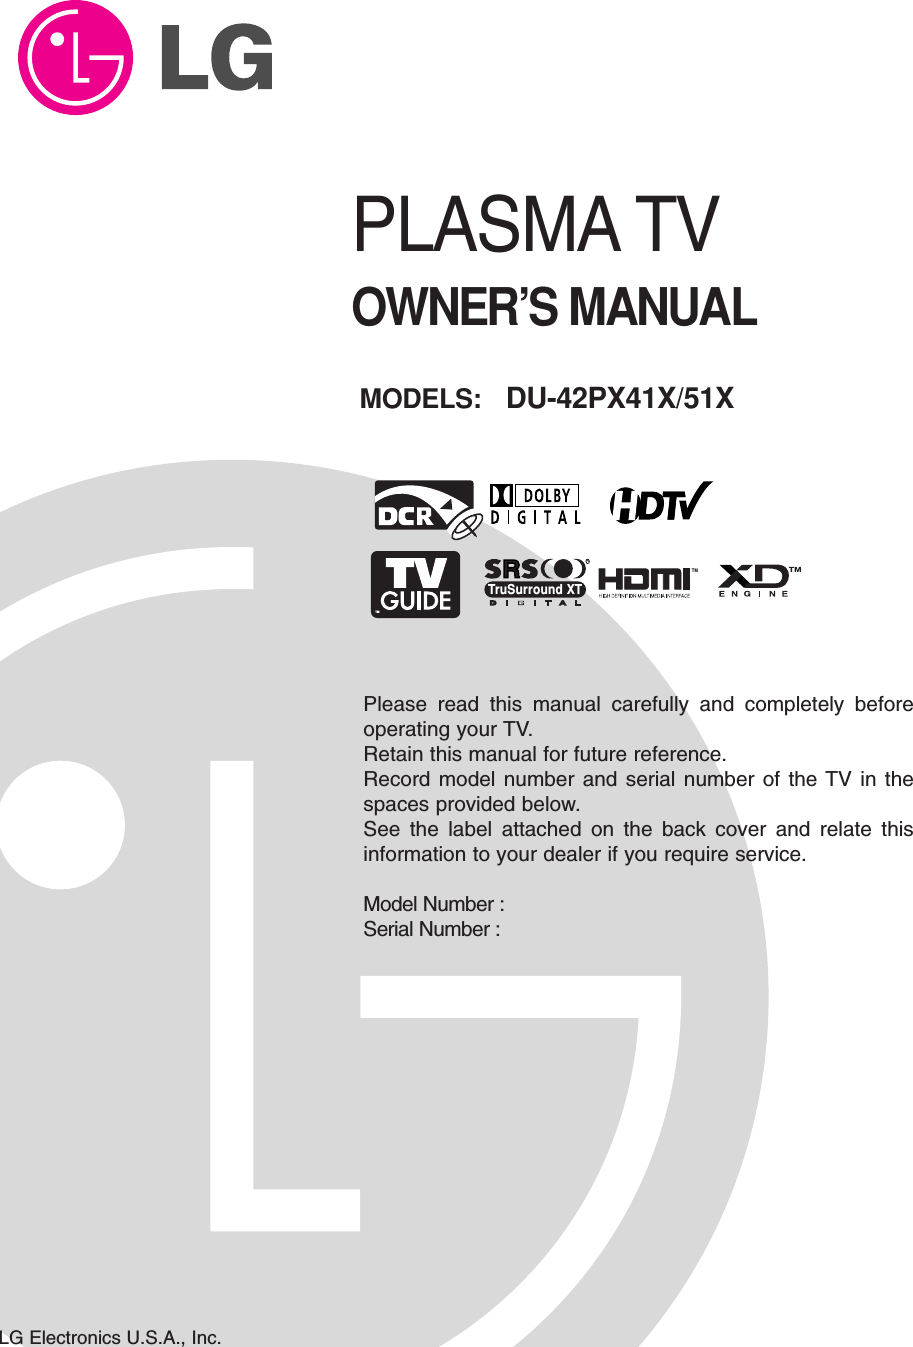 Please read this manual carefully and completely beforeoperating your TV. Retain this manual for future reference.Record model number and serial number of the TV in thespaces provided below. See the label attached on the back cover and relate thisinformation to your dealer if you require service.Model Number : Serial Number : MODELS: DU-42PX41X/51XLG Electronics U.S.A., Inc.TMRTruSurround XTPLASMA TVOWNER’S MANUAL